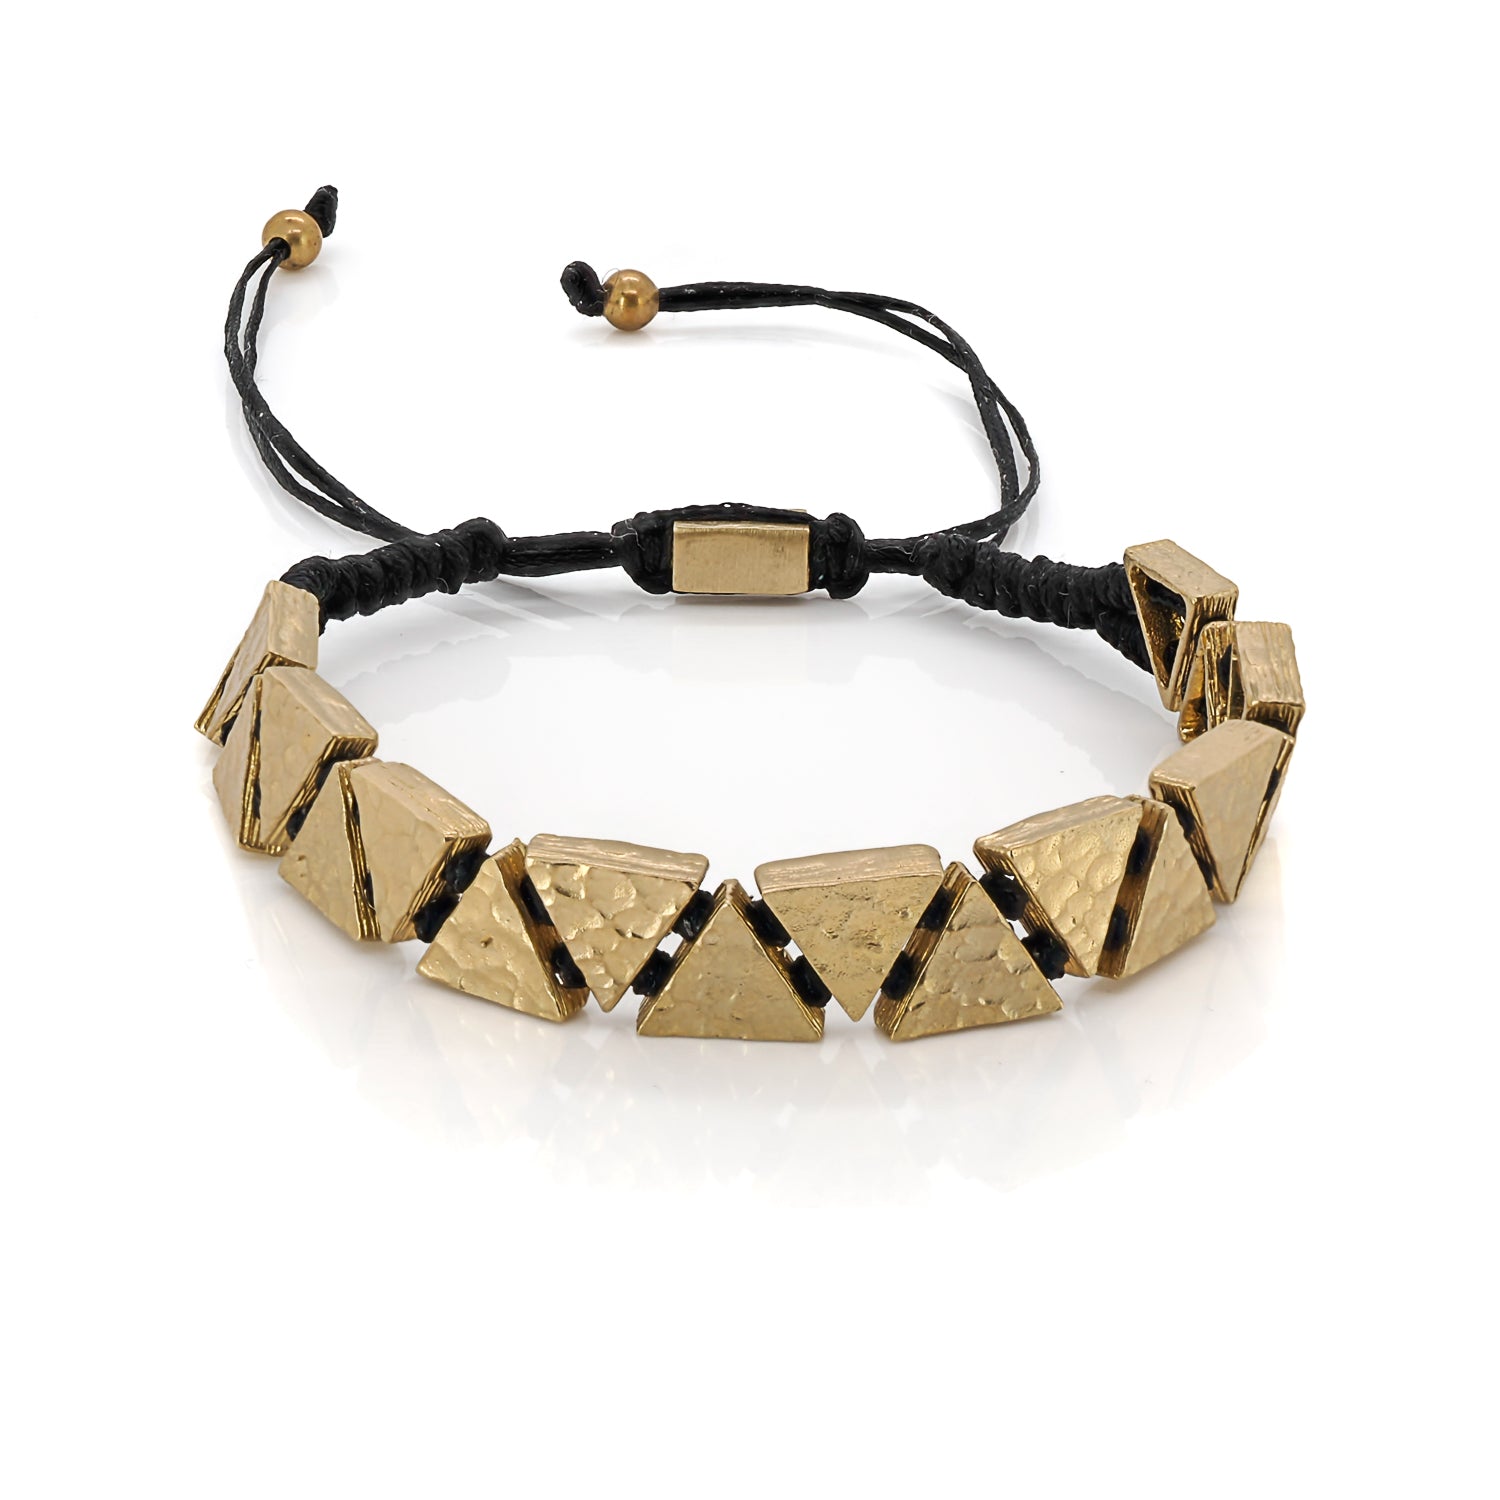 Black and Gold Triangle Bracelet - Handcrafted with 24K Gold Plated Brass, Adjustable Design